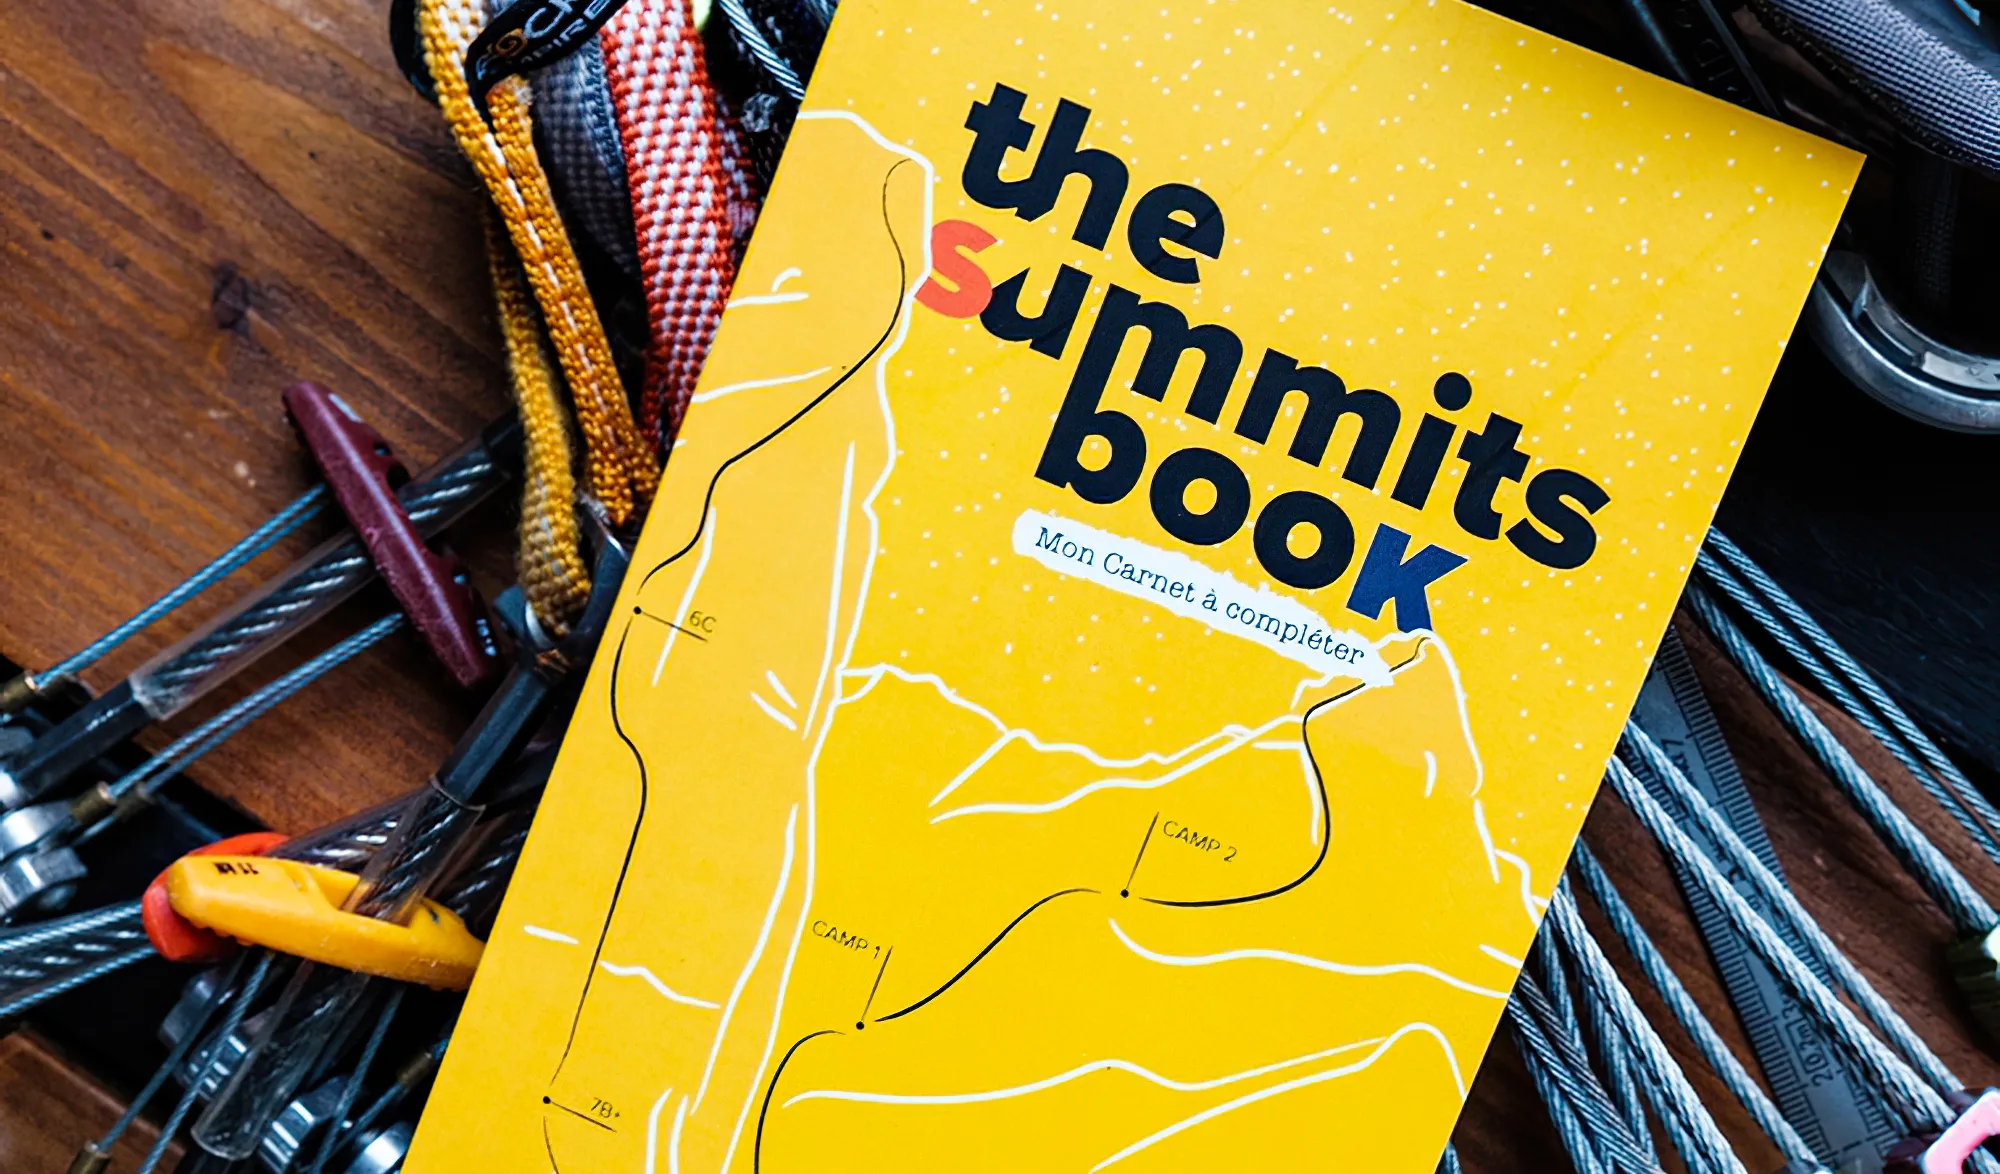 The summits book